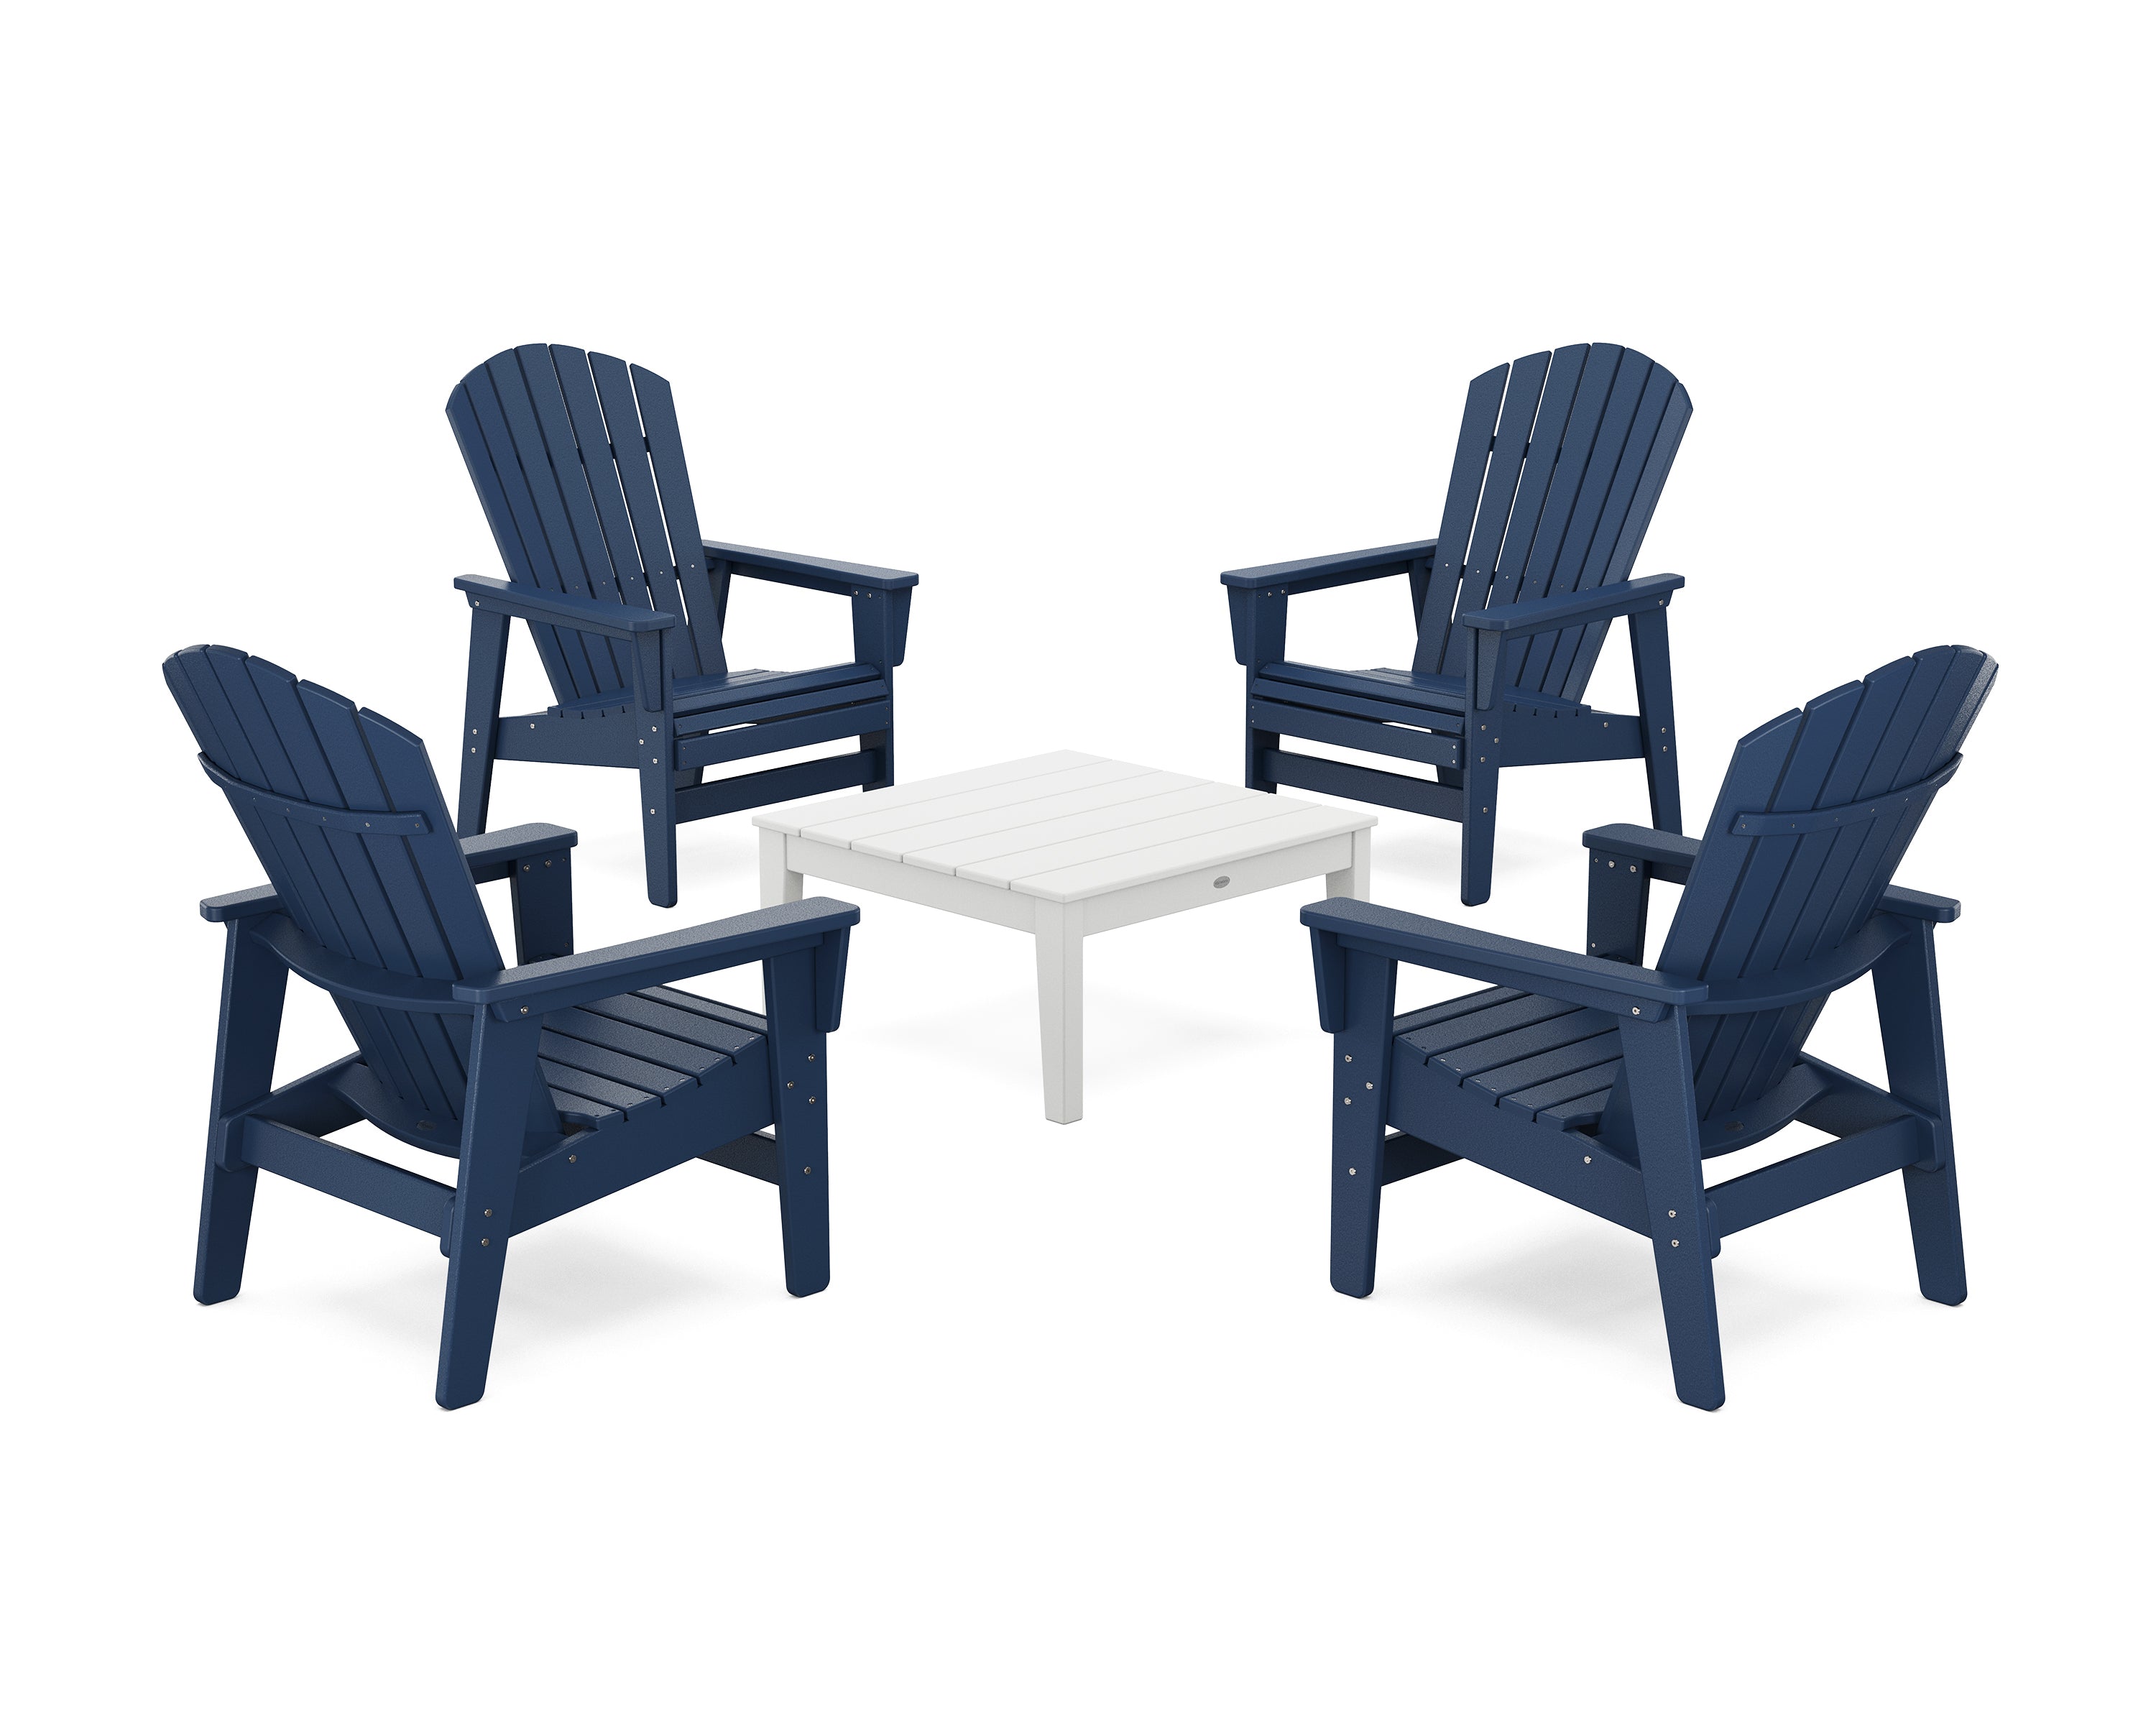 POLYWOOD® 5-Piece Nautical Grand Upright Adirondack Chair Conversation Group in Navy / White